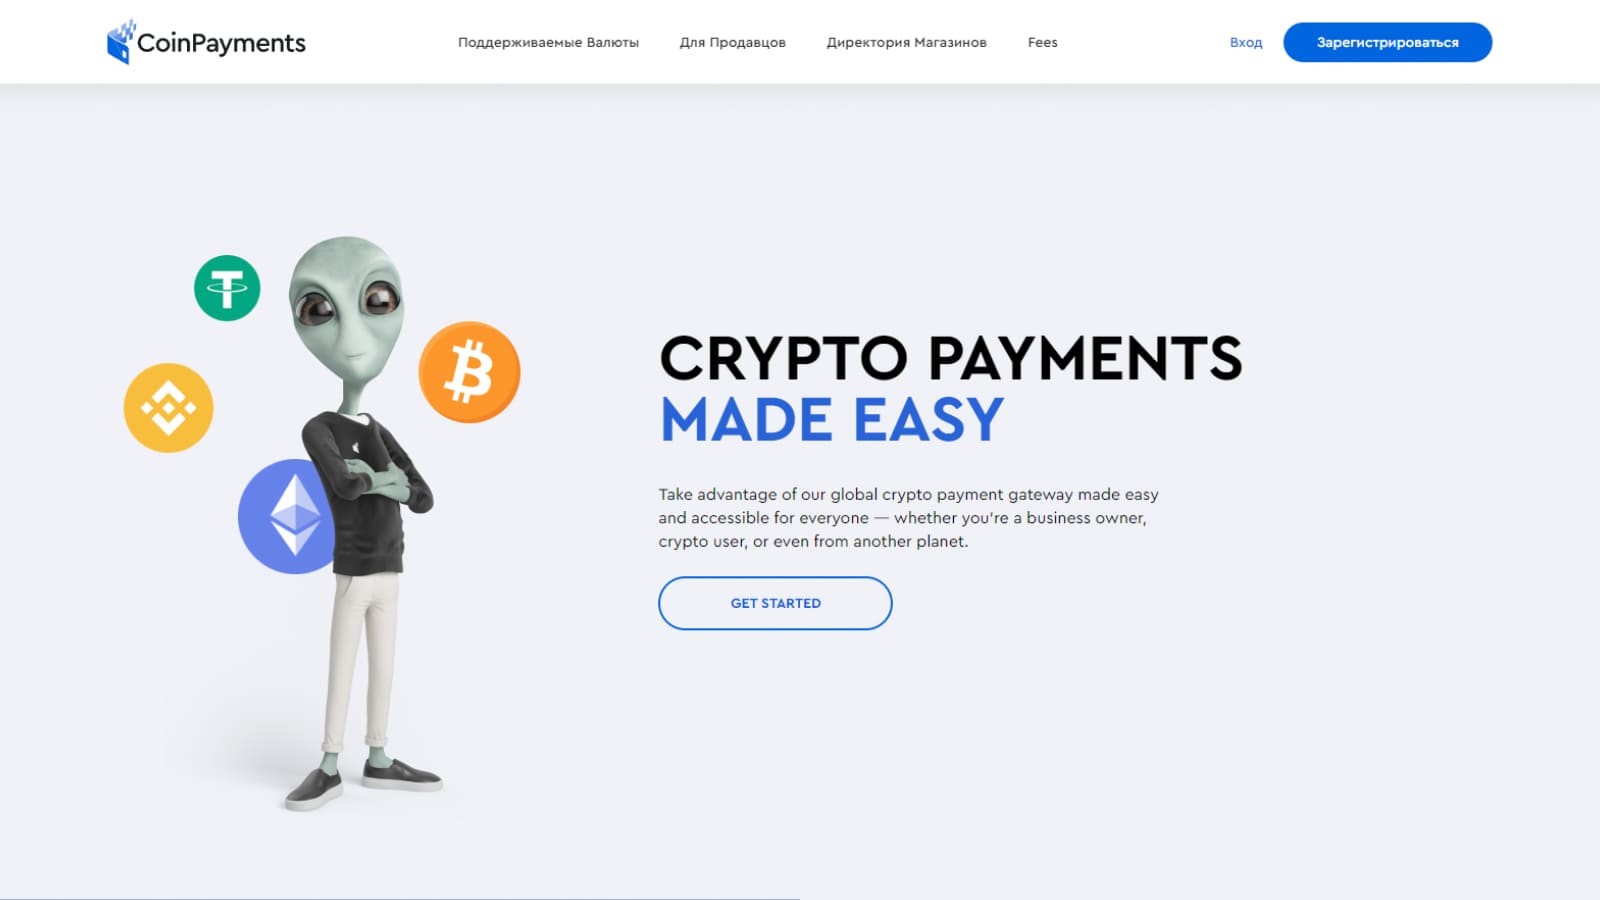 CoinPayments offers a large number of ways to accept cryptocurrency payments from your customers.